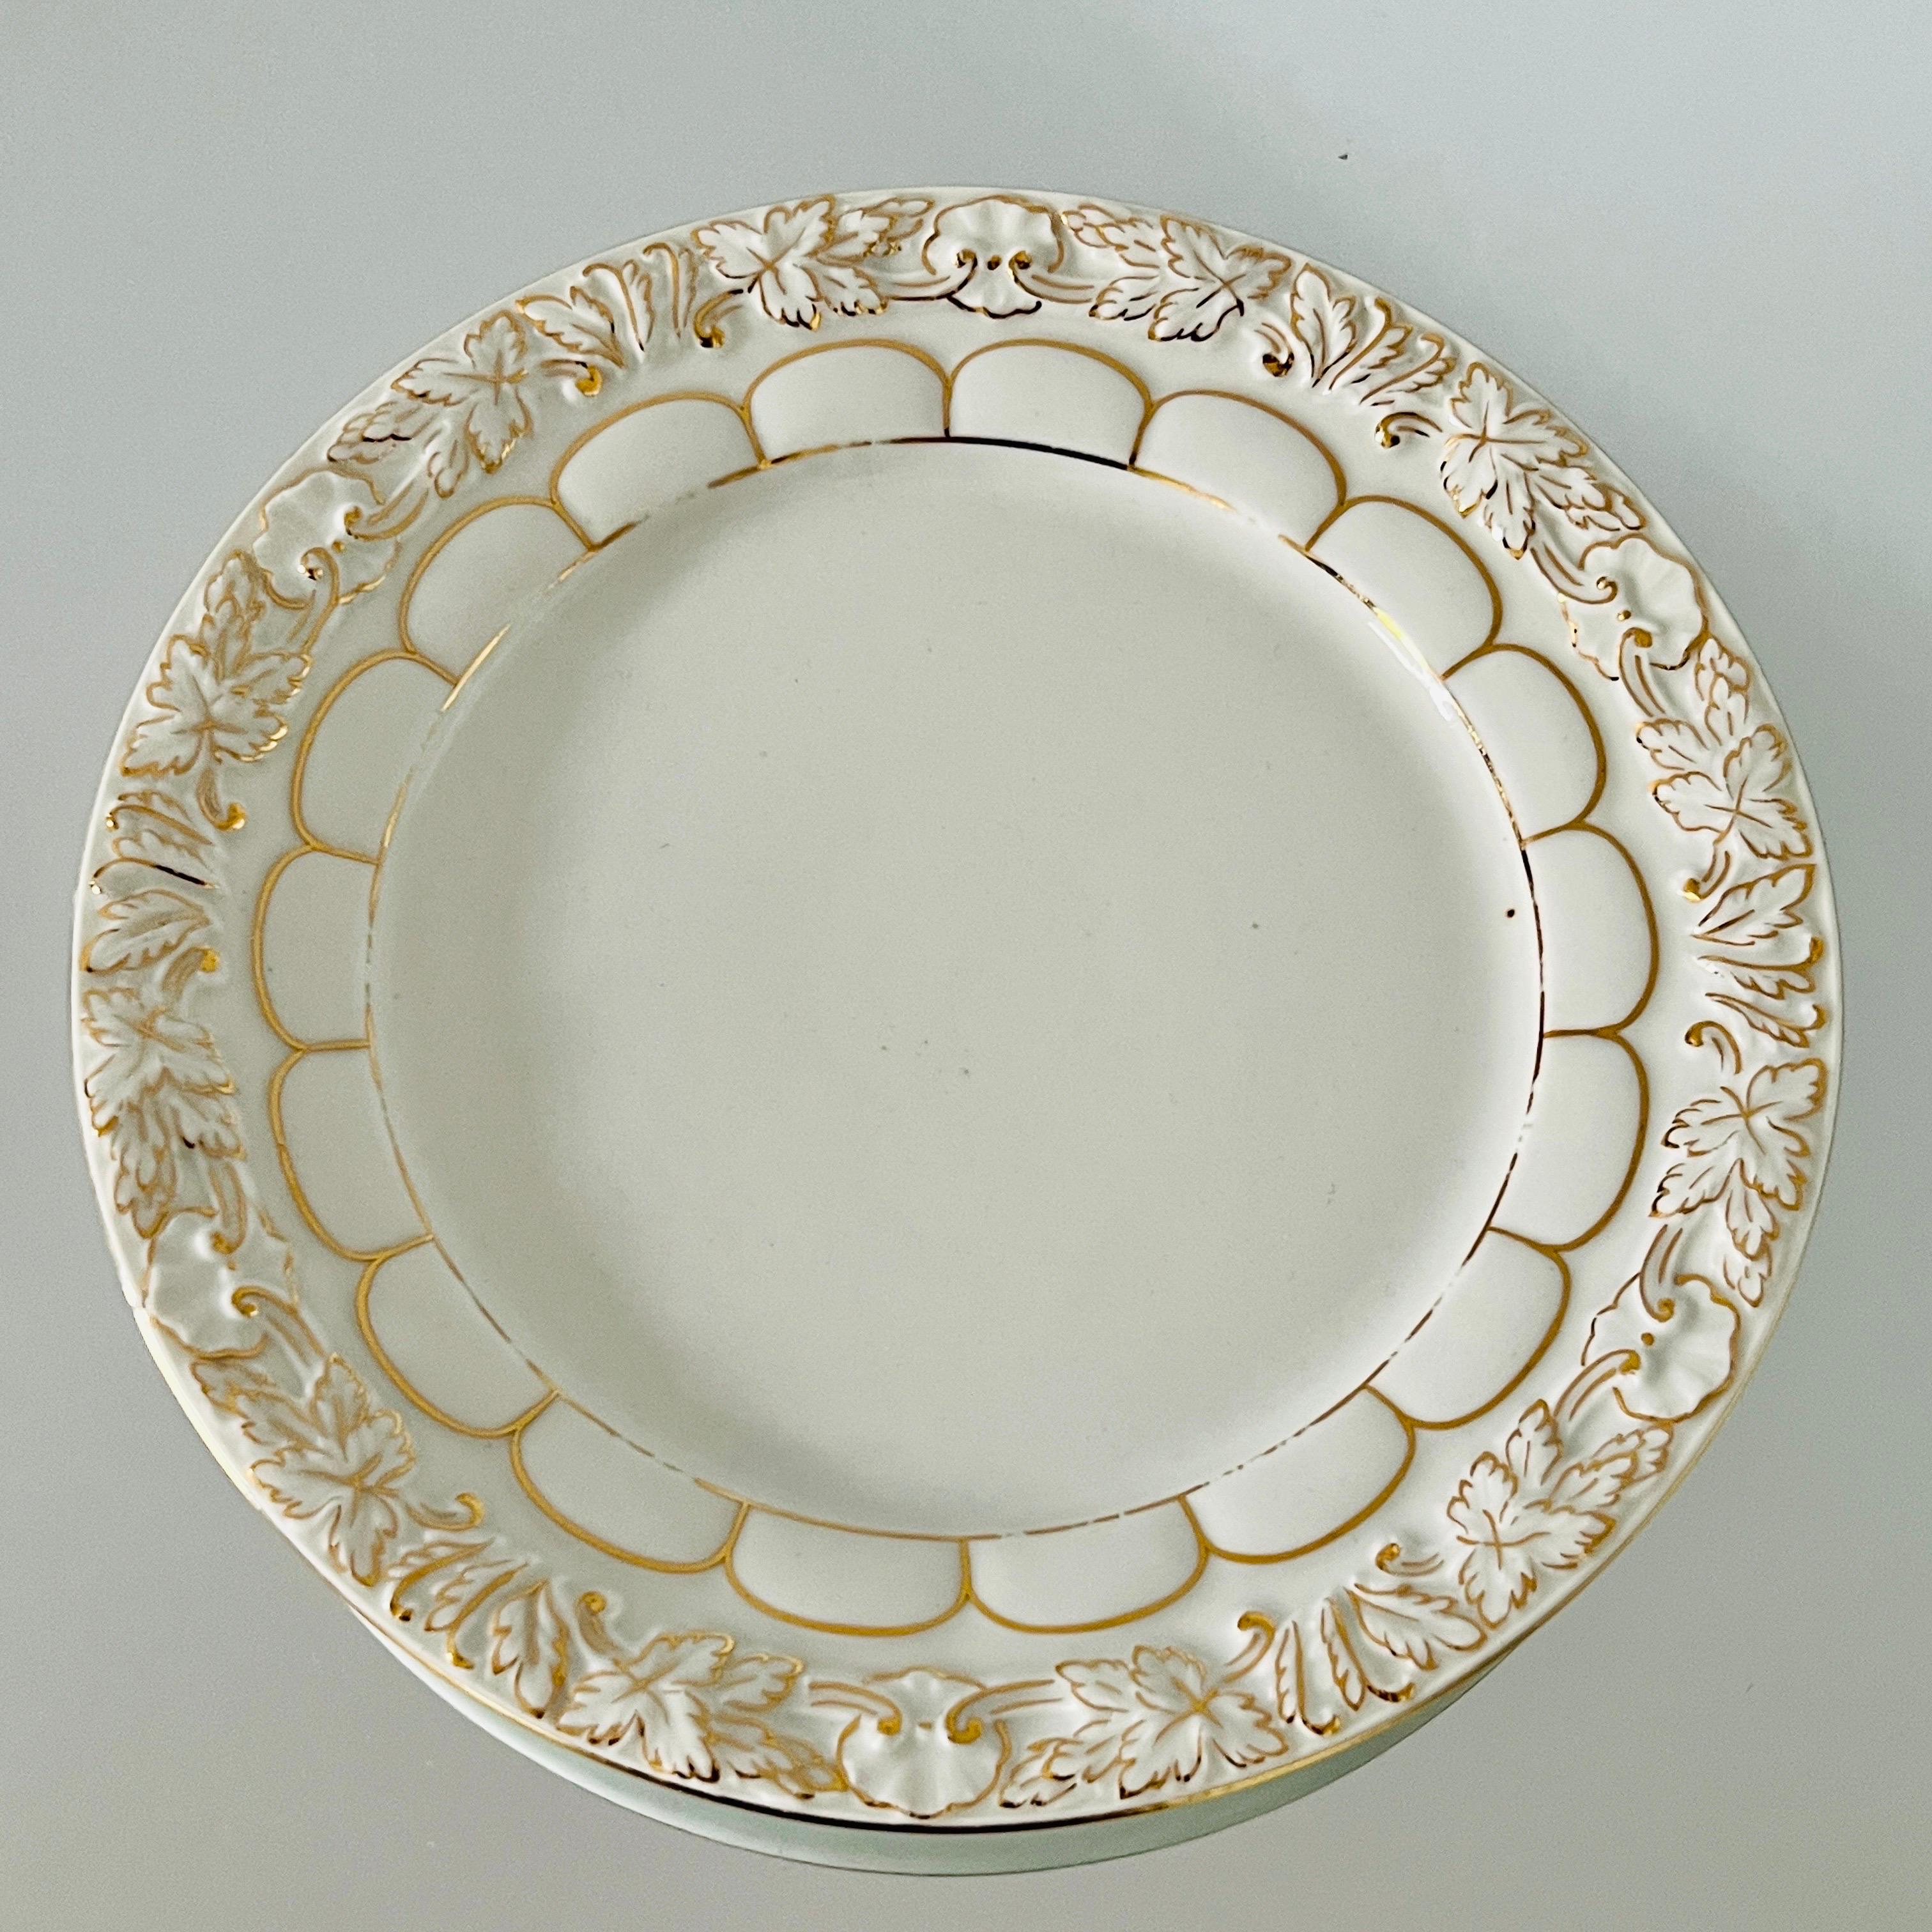 Meissen Germany Porcelain and Gold Baroque Dessert Plates, Set / 11 In Good Condition For Sale In Fort Lauderdale, FL